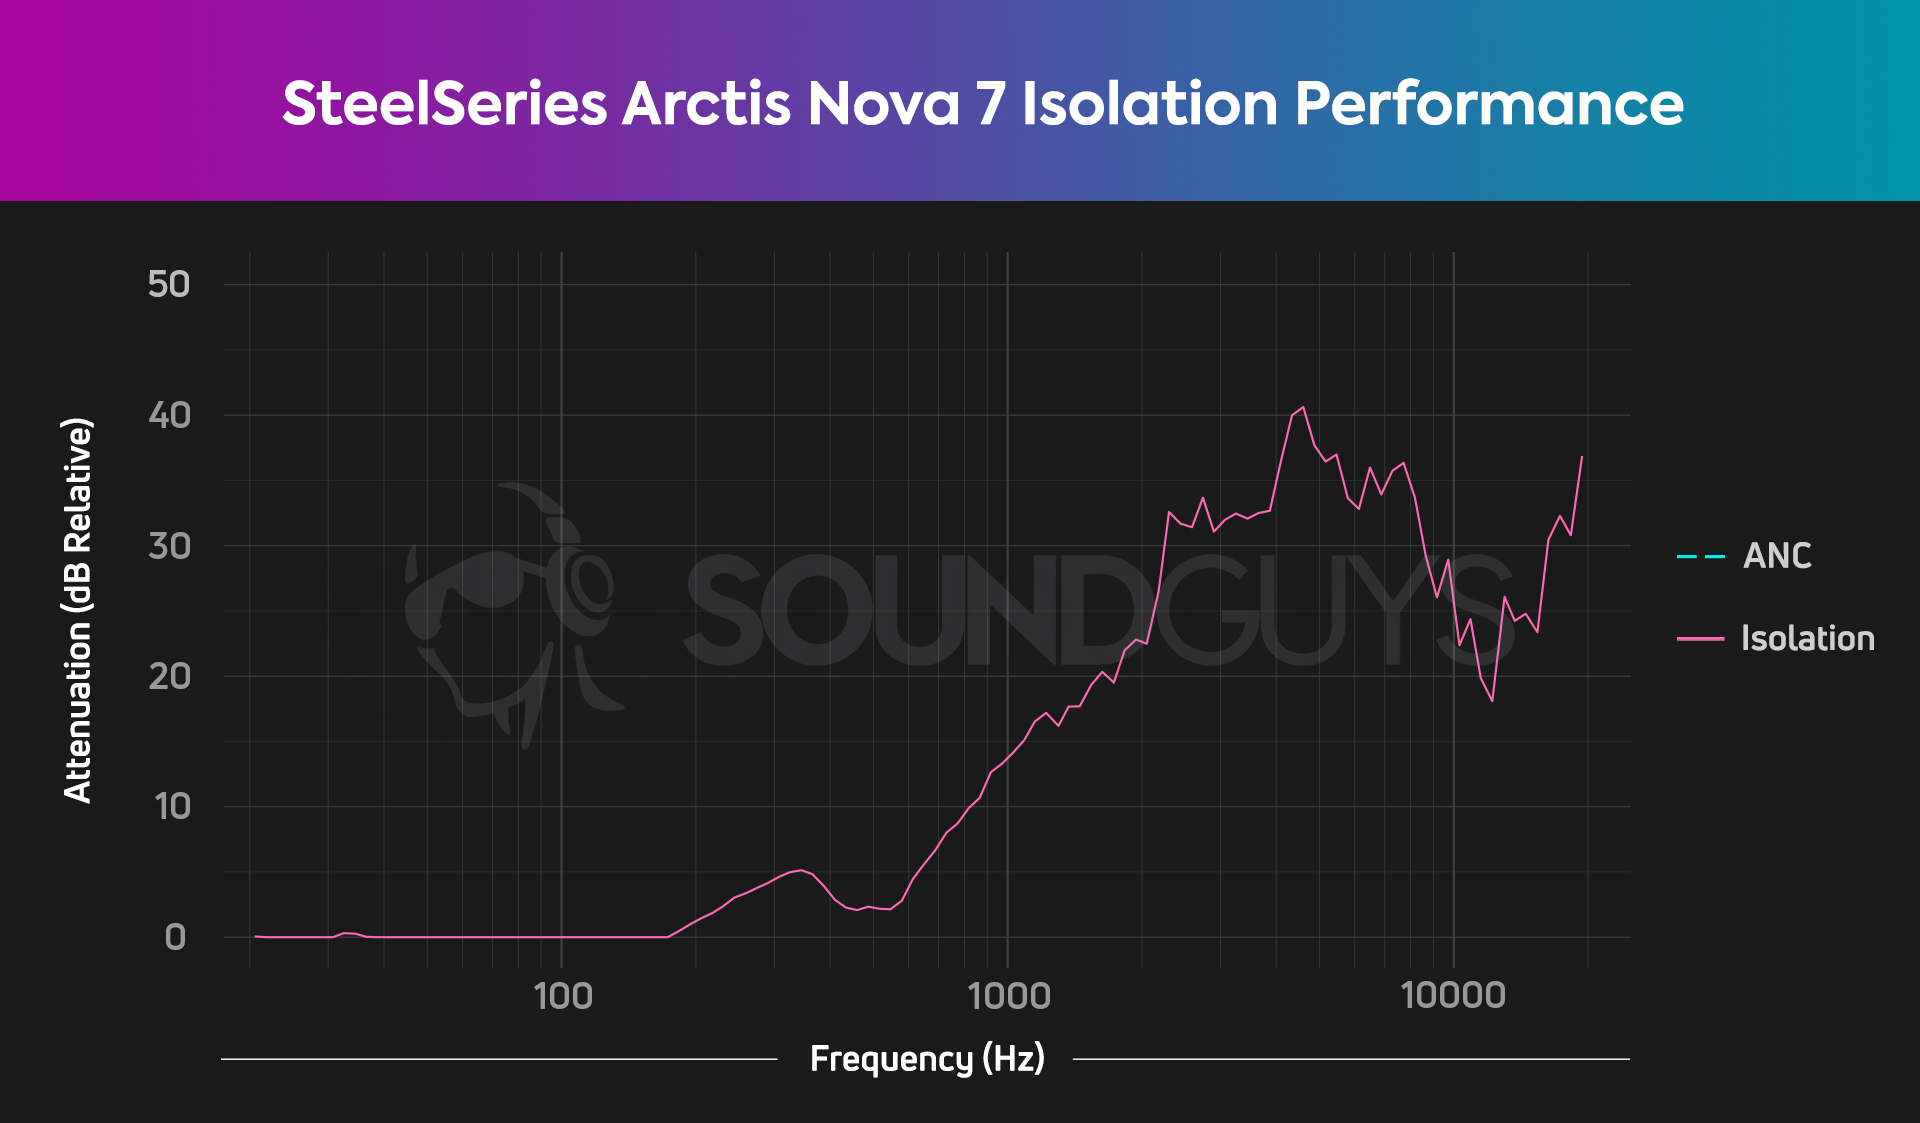 An isolation chart for the SteelSeries Arctis Nova 7, which shows average isolation for a gaming headset.